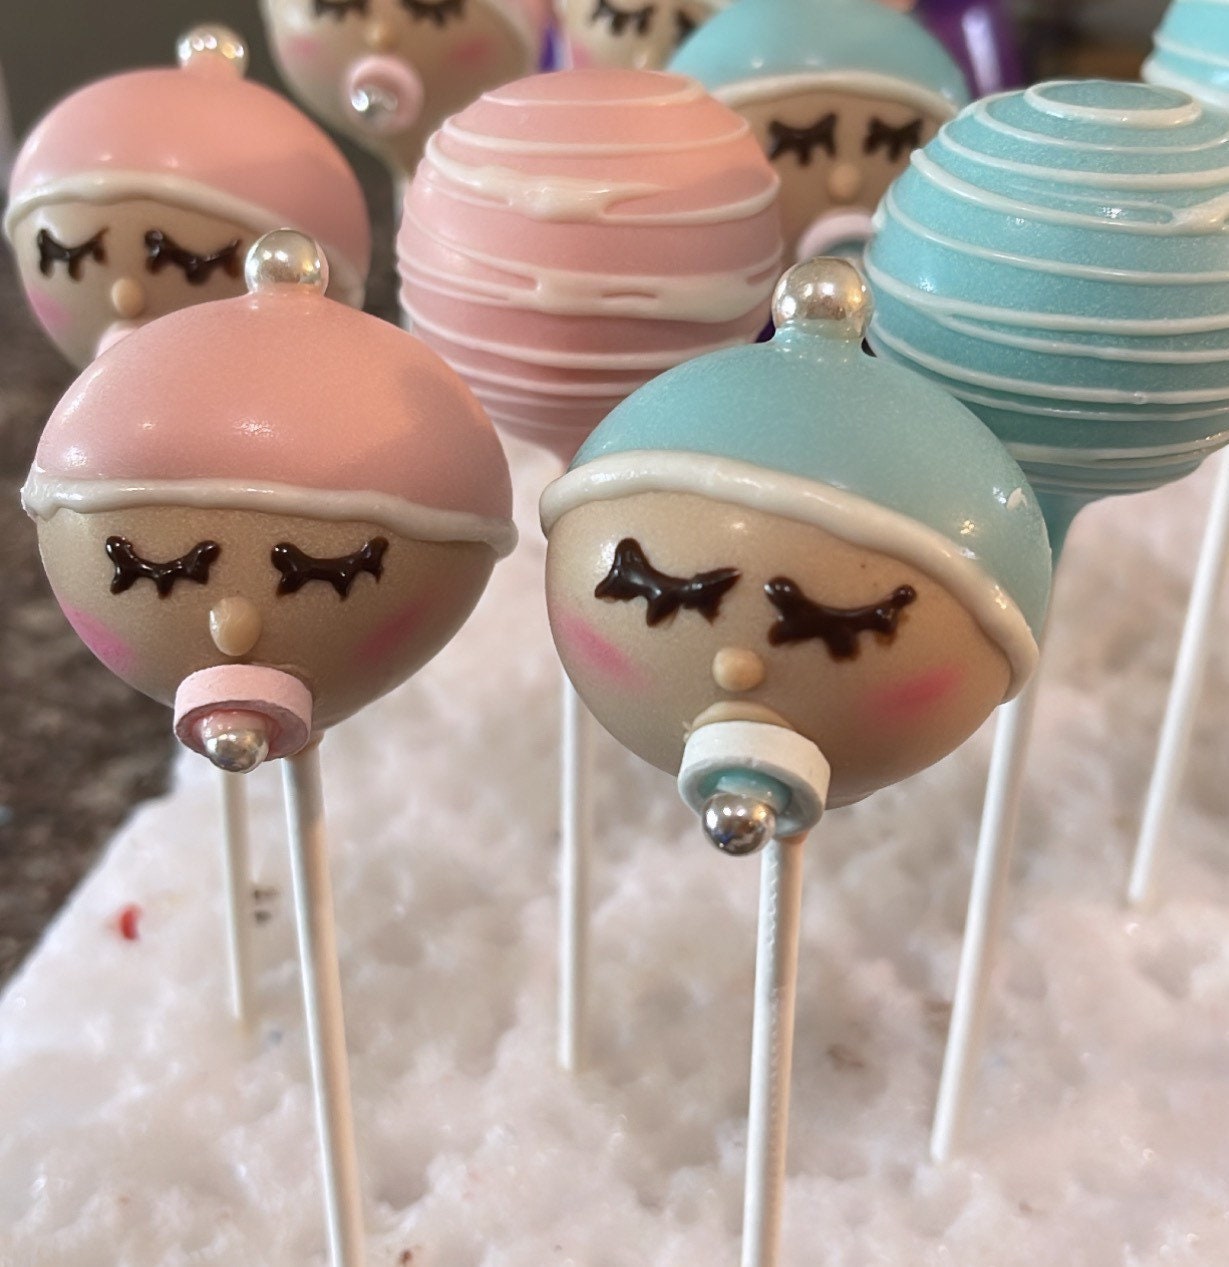 How to Make Gender Reveal Cake Pops For a Baby Shower - Restless